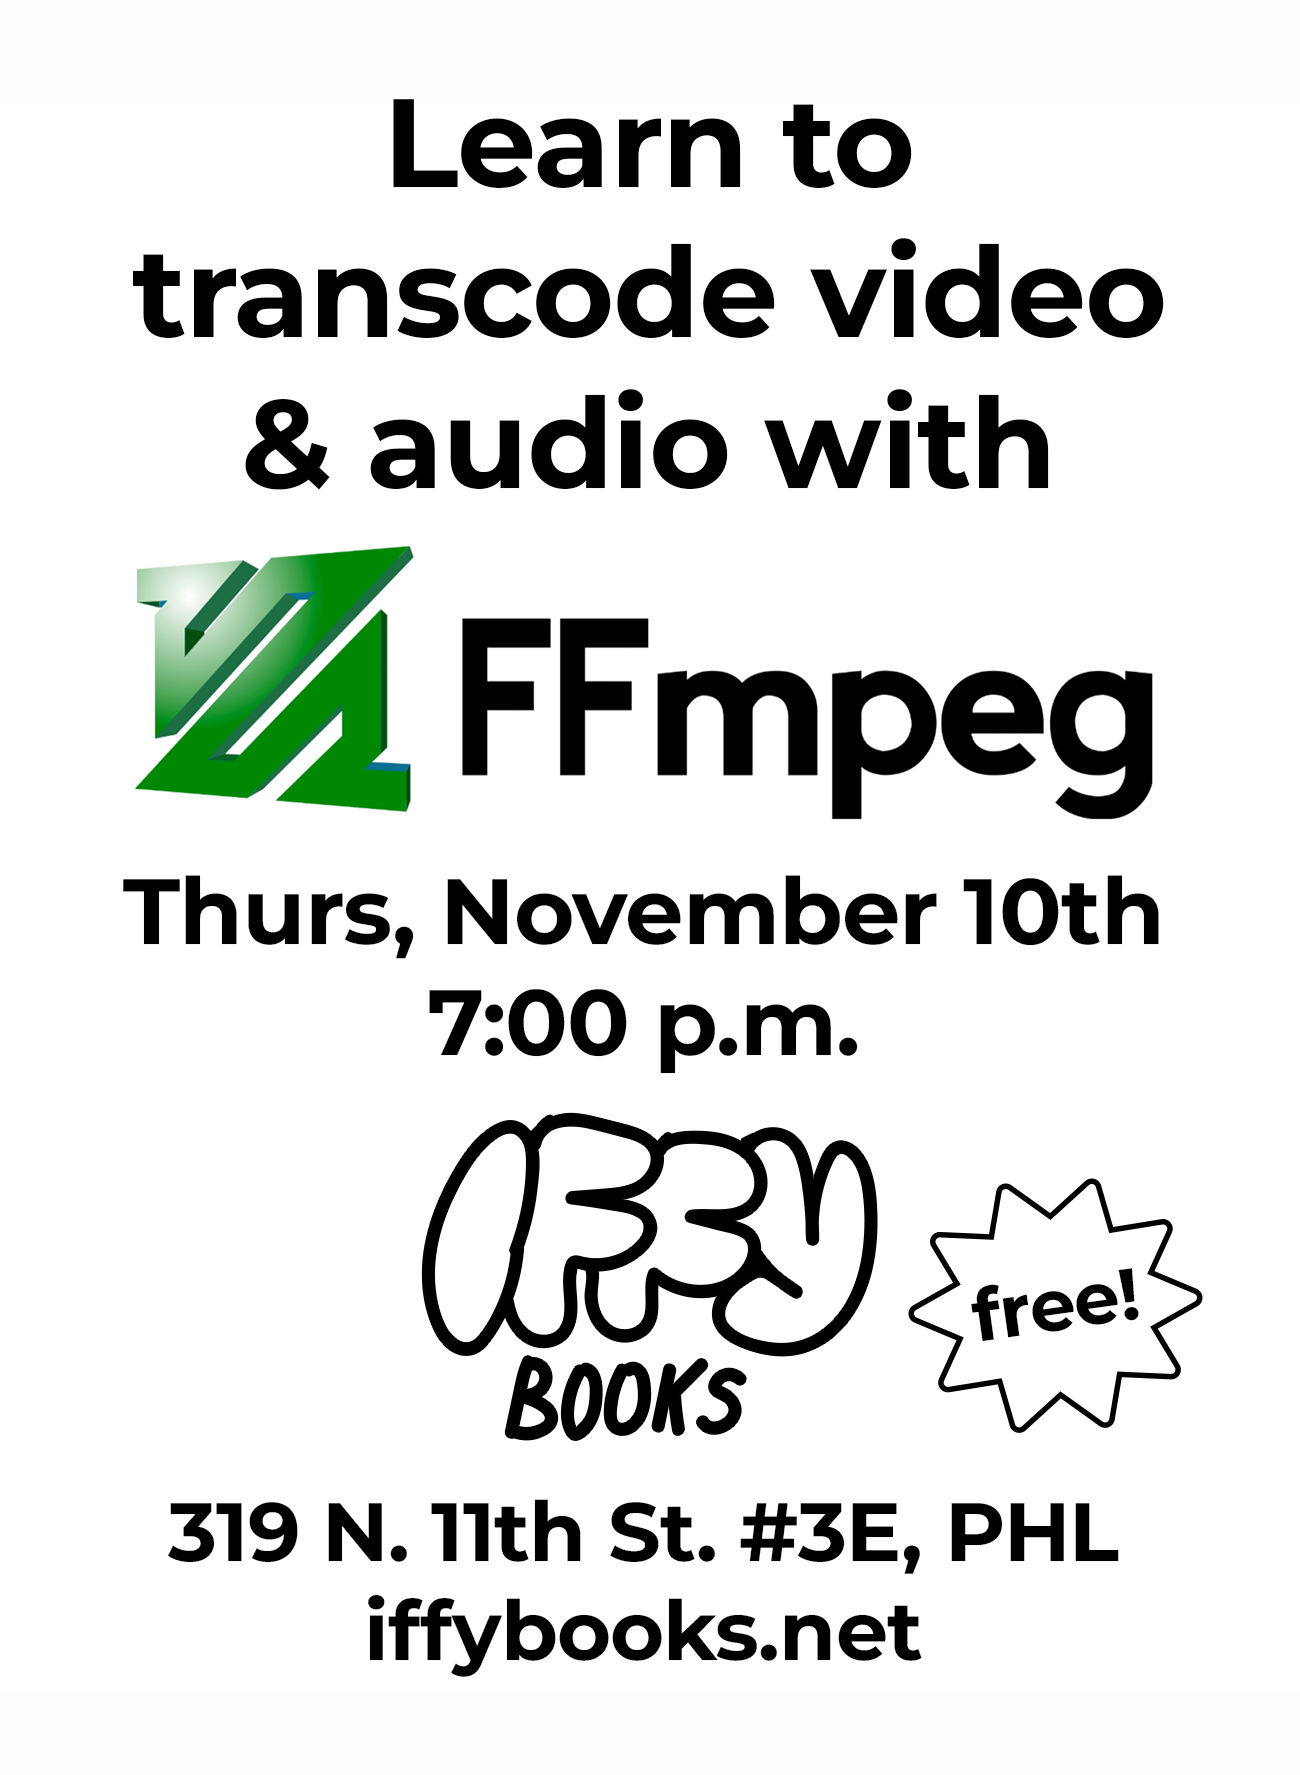 Flyer image with the FFmpeg logo (a green zig-zag line) and the following text: Learn to transcode video & audio with FFmpeg Thurs, November 10th 7:00 p.m. free! Iffy Books 319 N. 11th St. #3E, PHL iffybooks.net